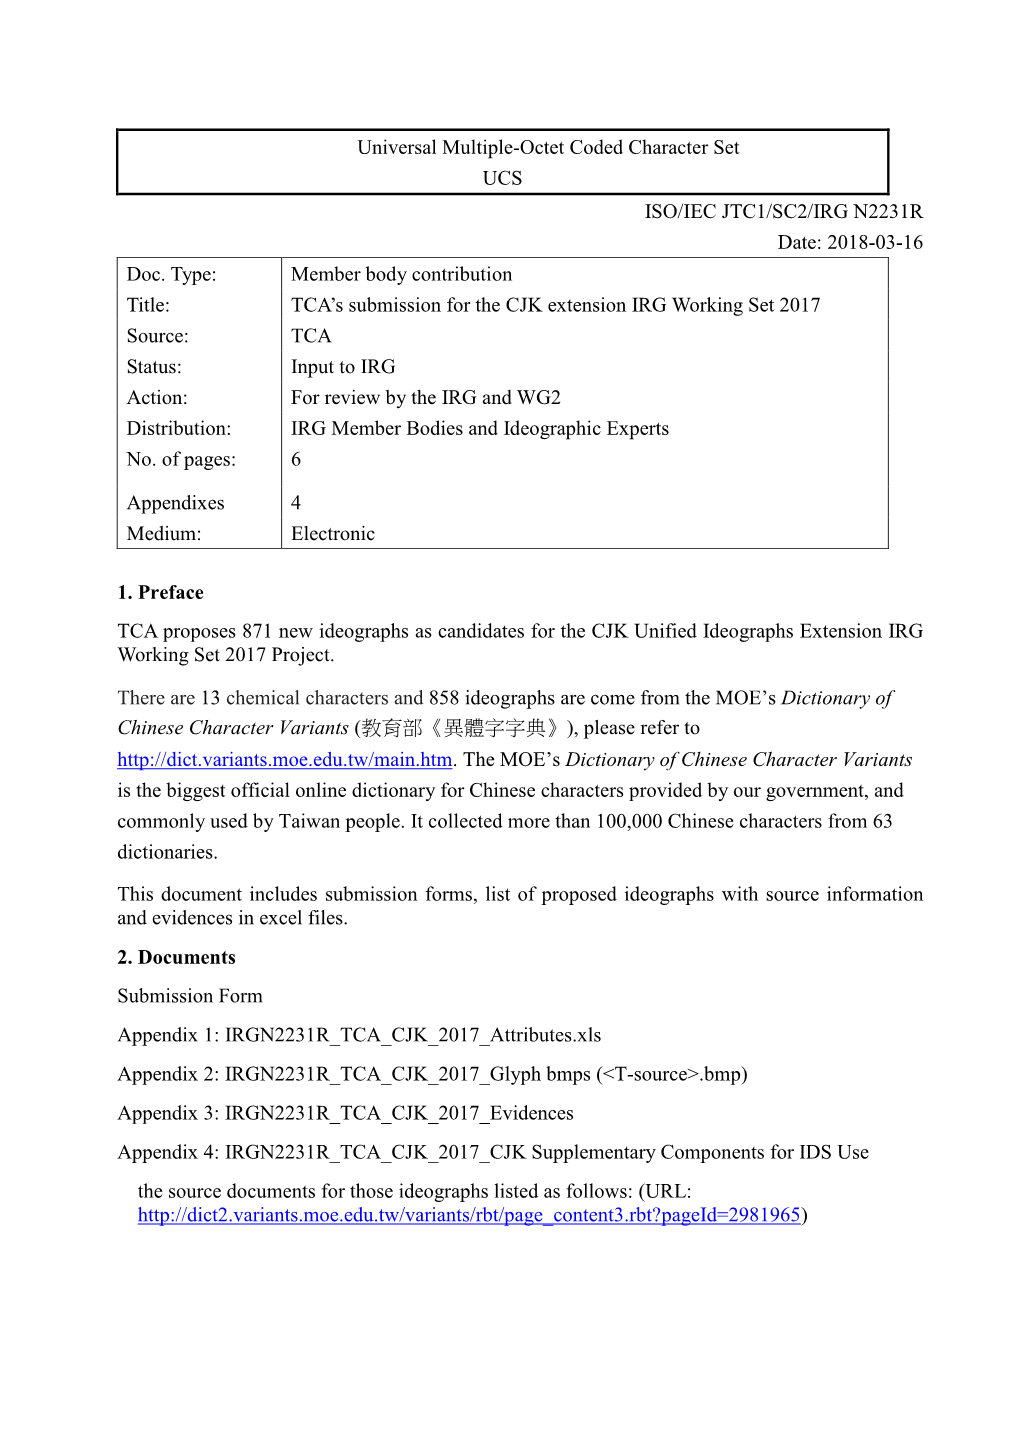 Universal Multiple-Octet Coded Character Set UCS ISO/IEC JTC1/SC2/IRG N2231R Date: 2018-03-16 Doc